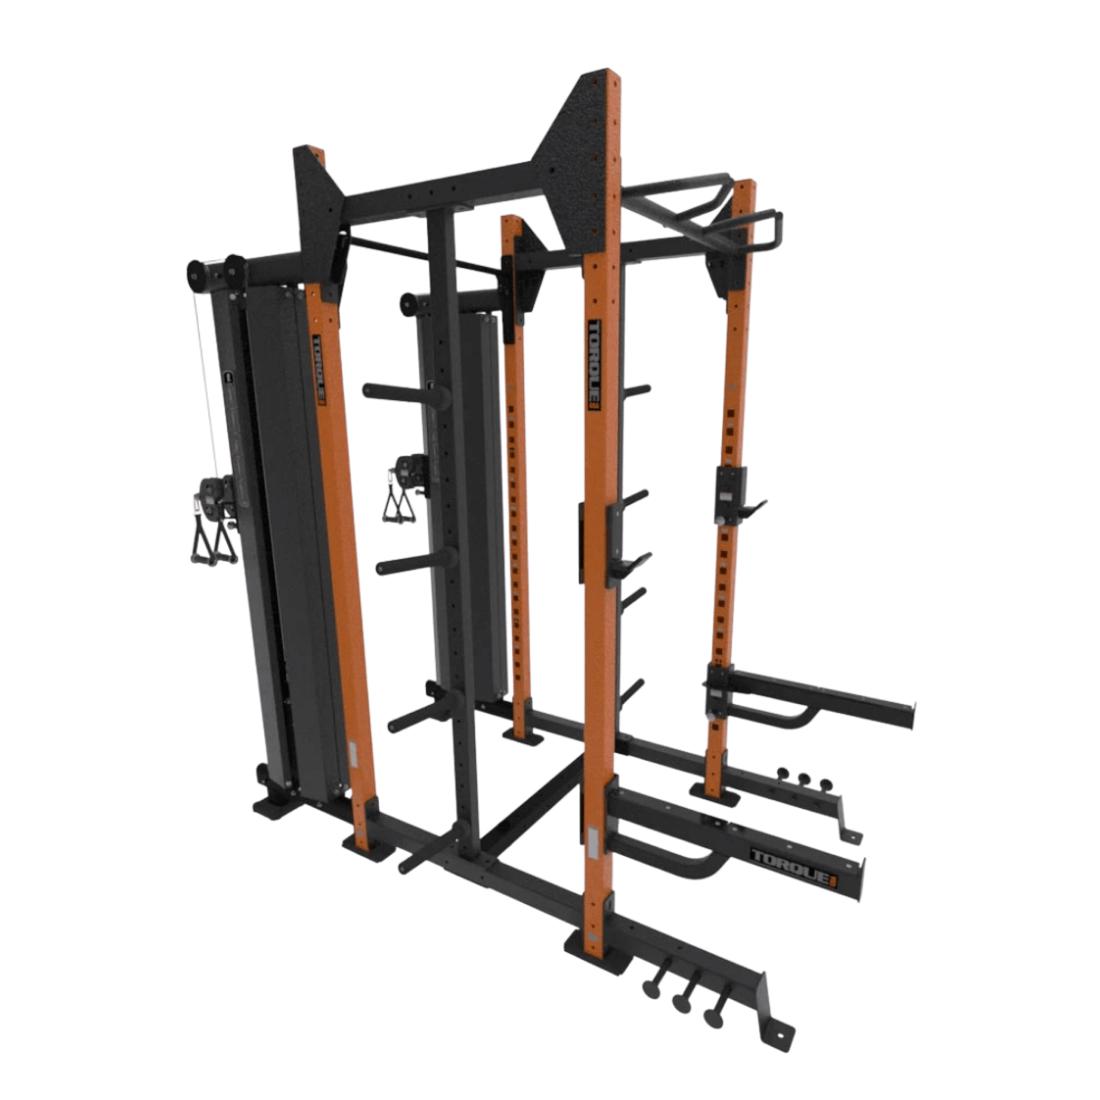 Torque Power Rack - Storage Cable Rack - X1 Package 4 X 4 Foot X-Siege-1